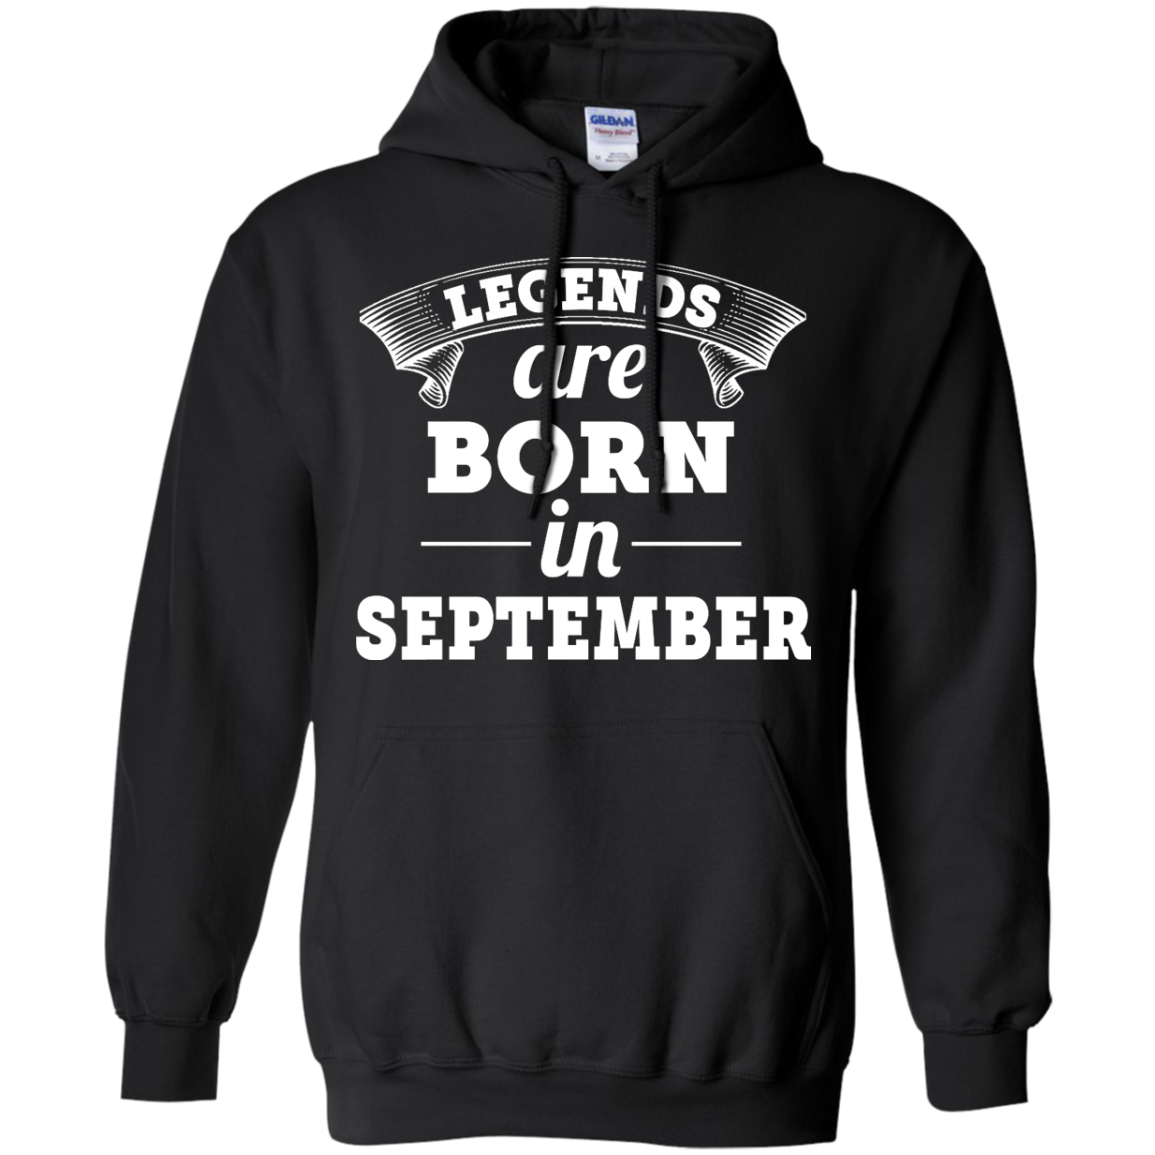 Legends are born in September Shirt, Hoodie, Tank